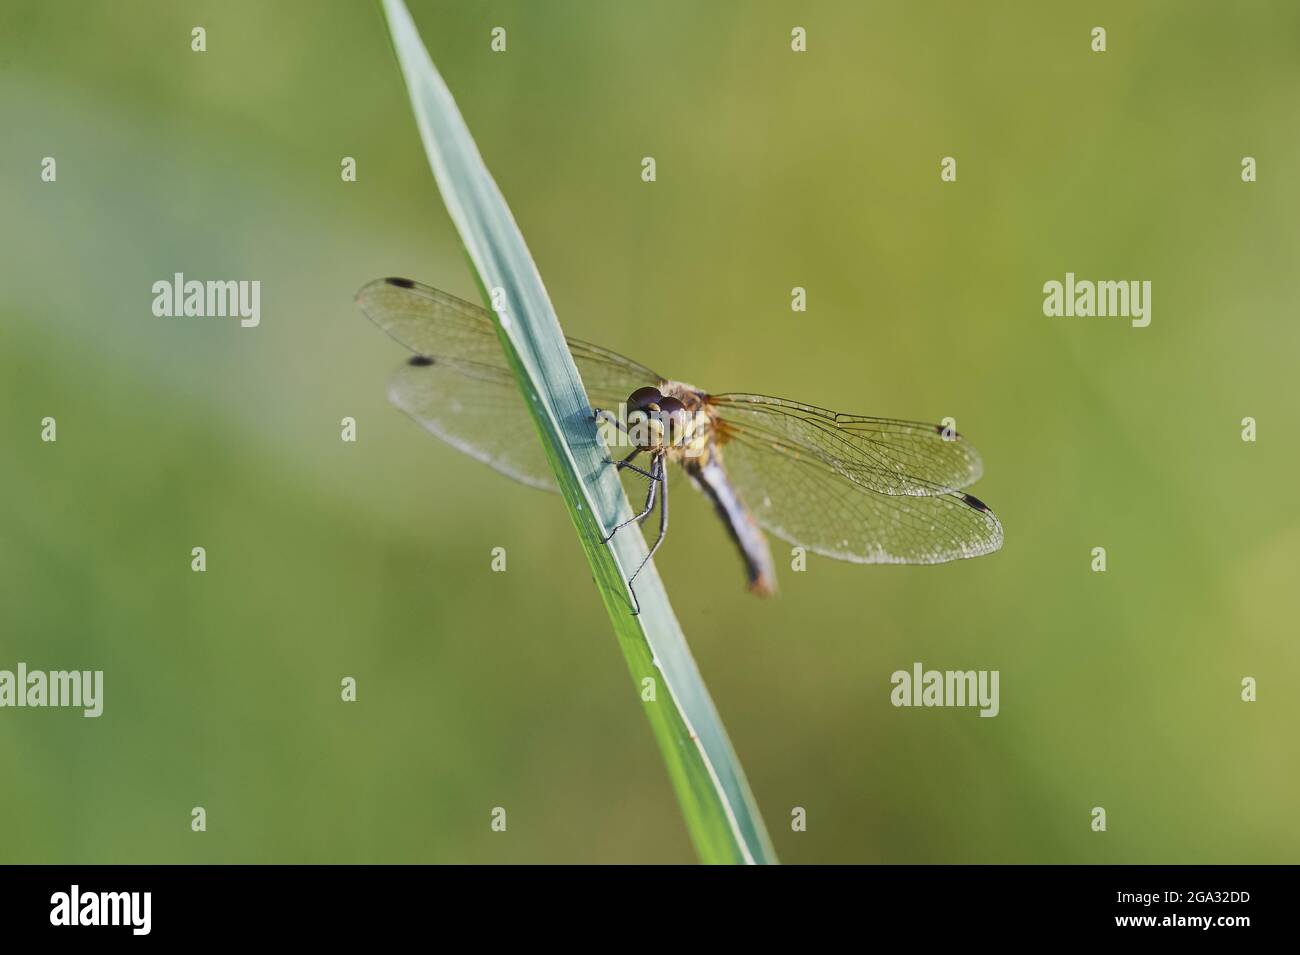 Four-spotted chaser (Libellula quadrimaculata) resting on a leaf; Bavaria, Germany Stock Photo